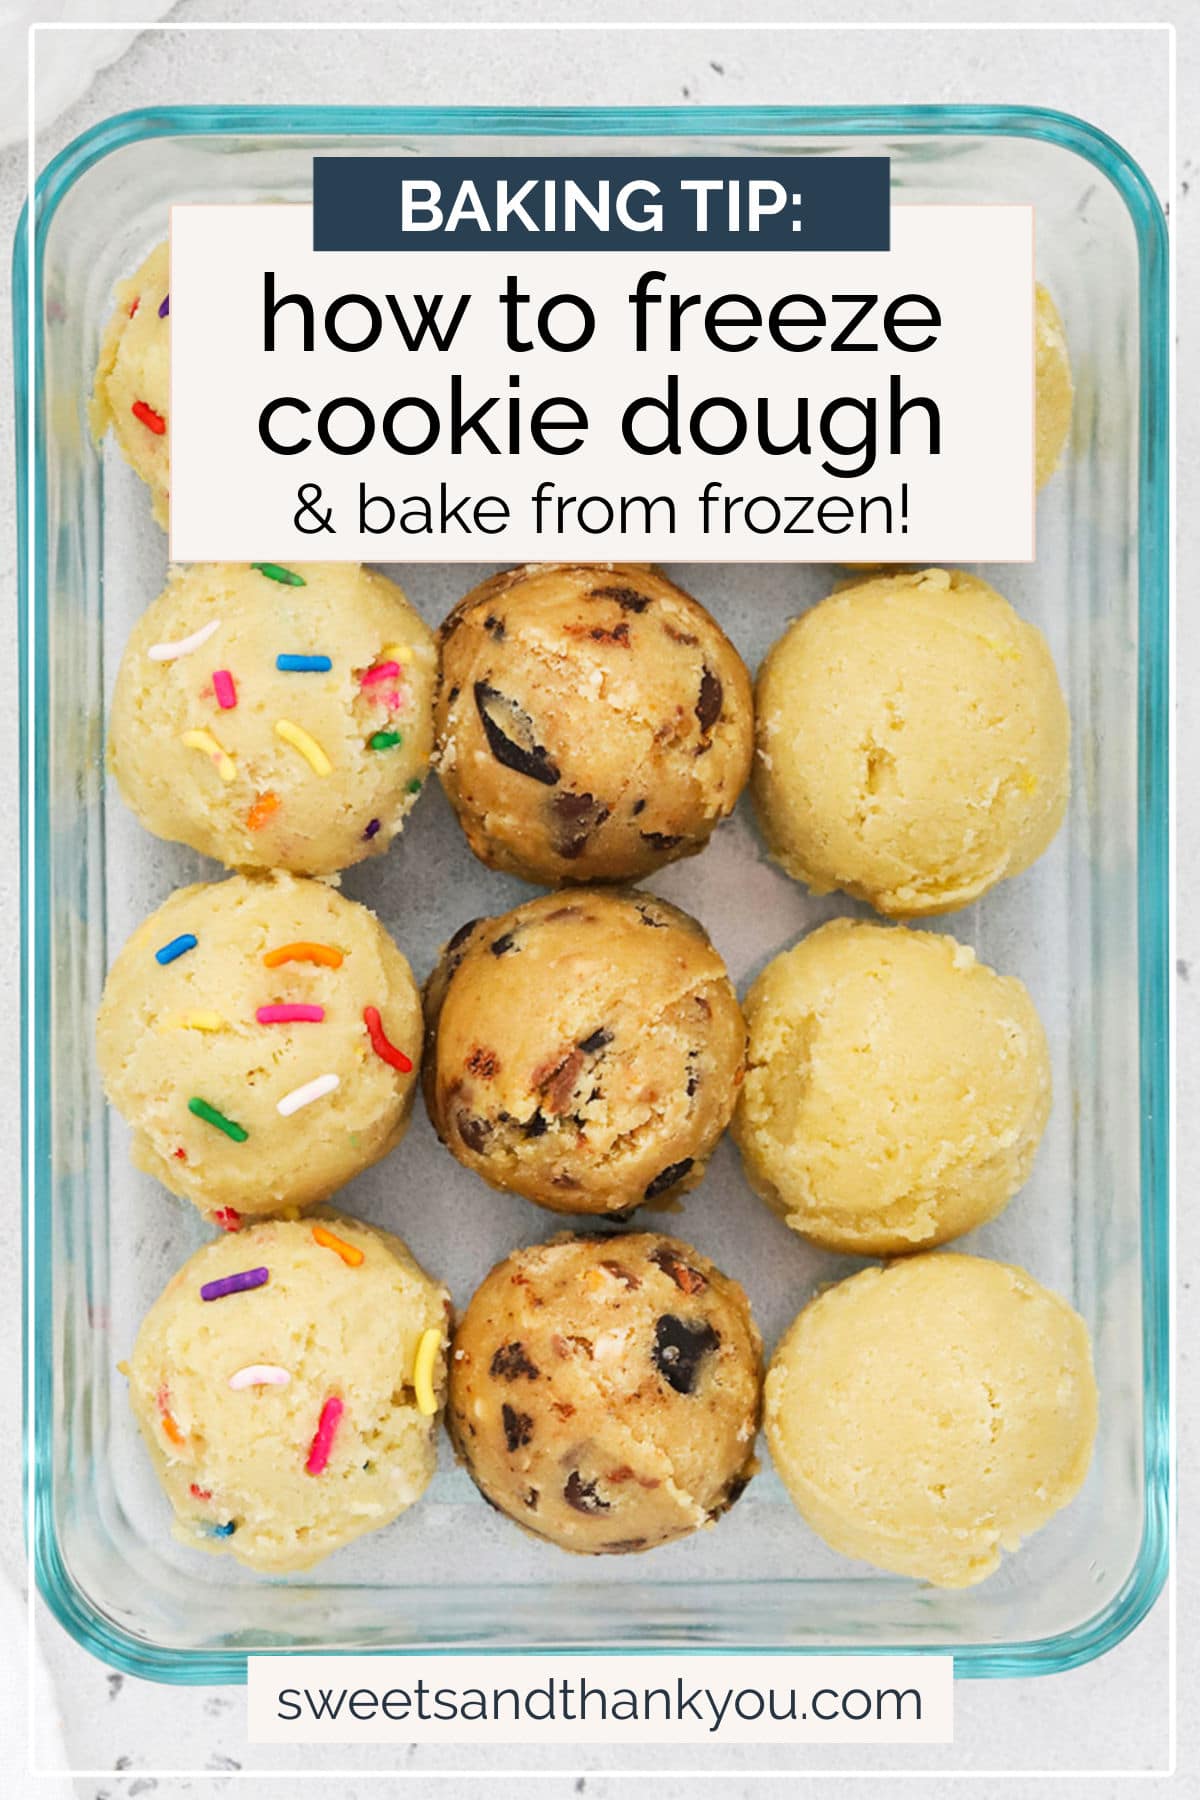 How To Freeze Cookie Dough - All the tips, tricks, and techniques you need to freeze cookie dough and how to bake frozen cookie dough when you need it. Now you can always have cookies on hand! // How to freeze cookies // how to bake frozen cookie dough // baking tips // gluten free cookie dough // gluten free freezer recipes // how to bake cookie dough from frozen 